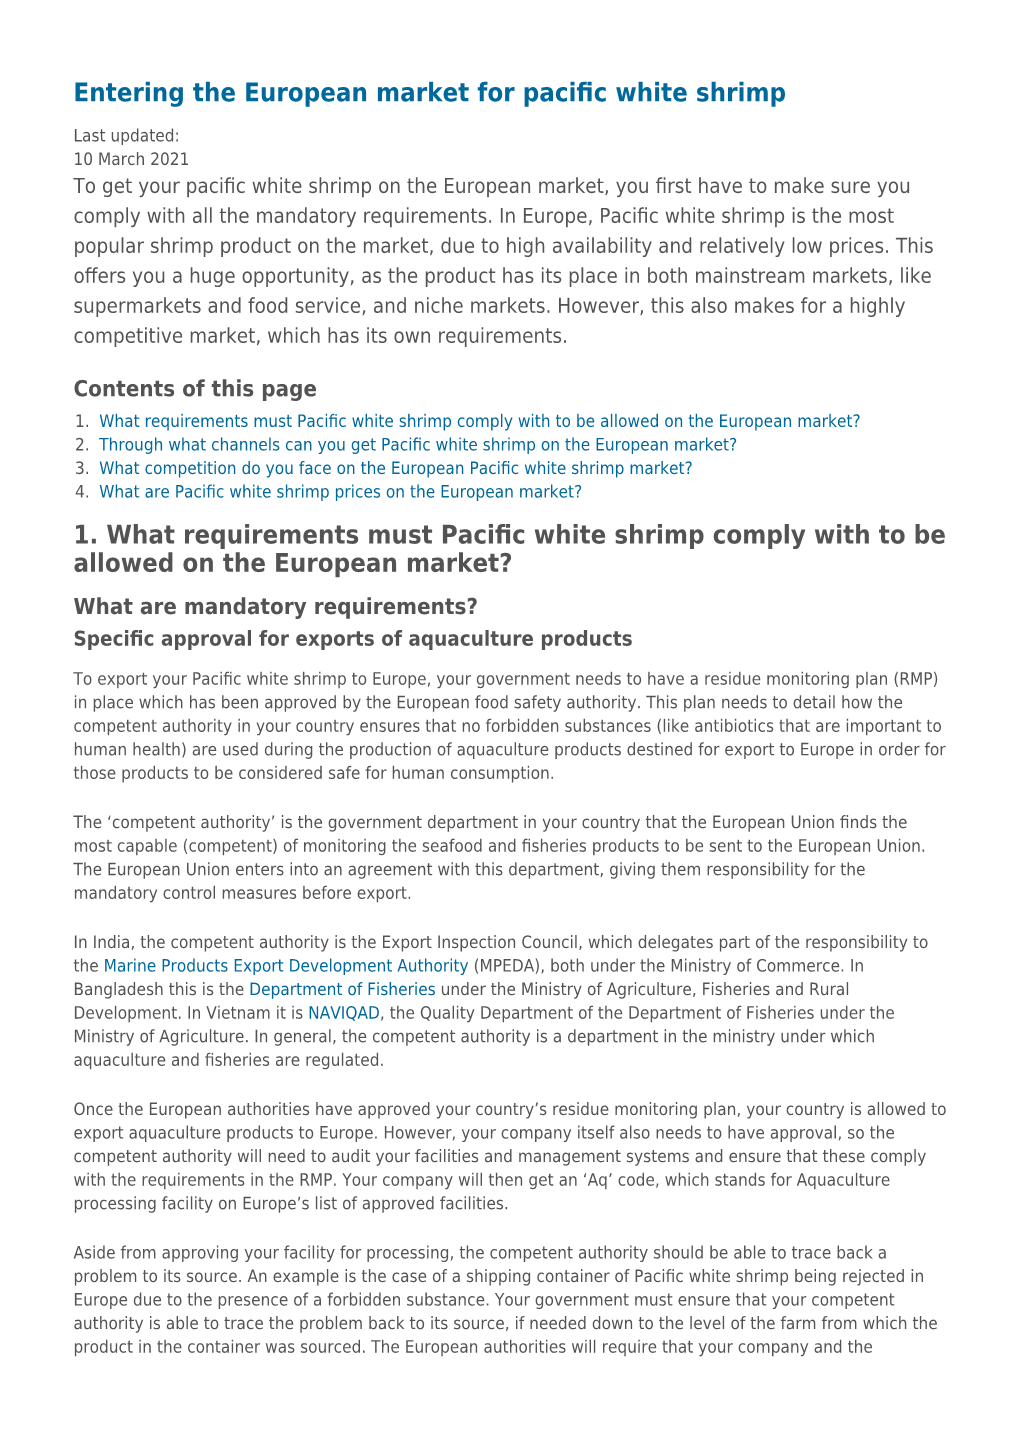 1. What Requirements Must Pacific White Shrimp Comply with to Be